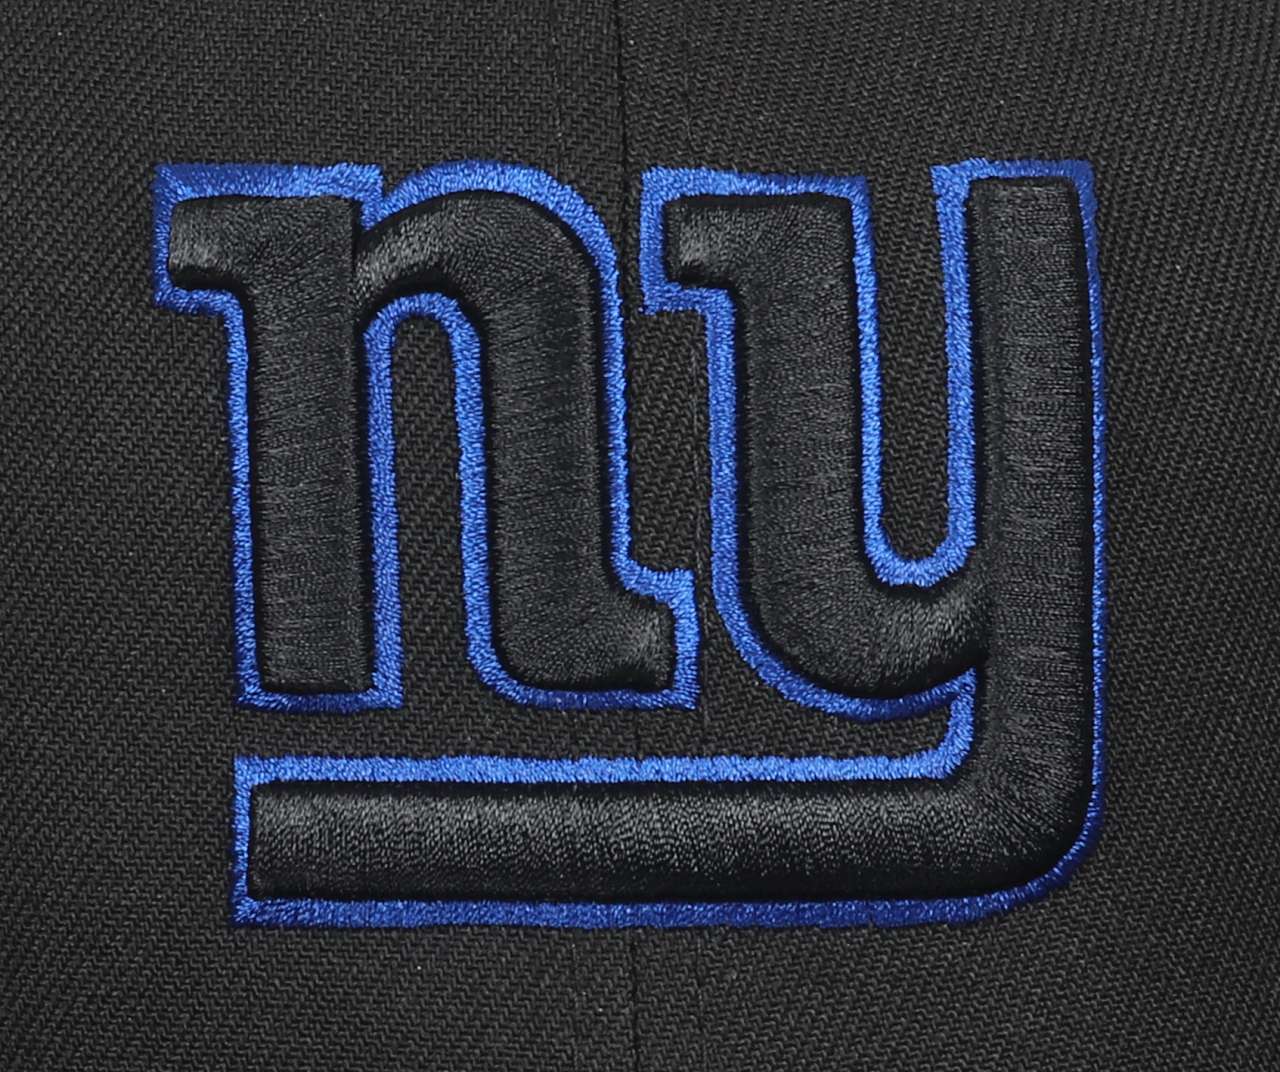 New York Giants NFL Team Colour 25th Anniversary Champions Sidepatch Black 9Fifty Snapback Cap New Era